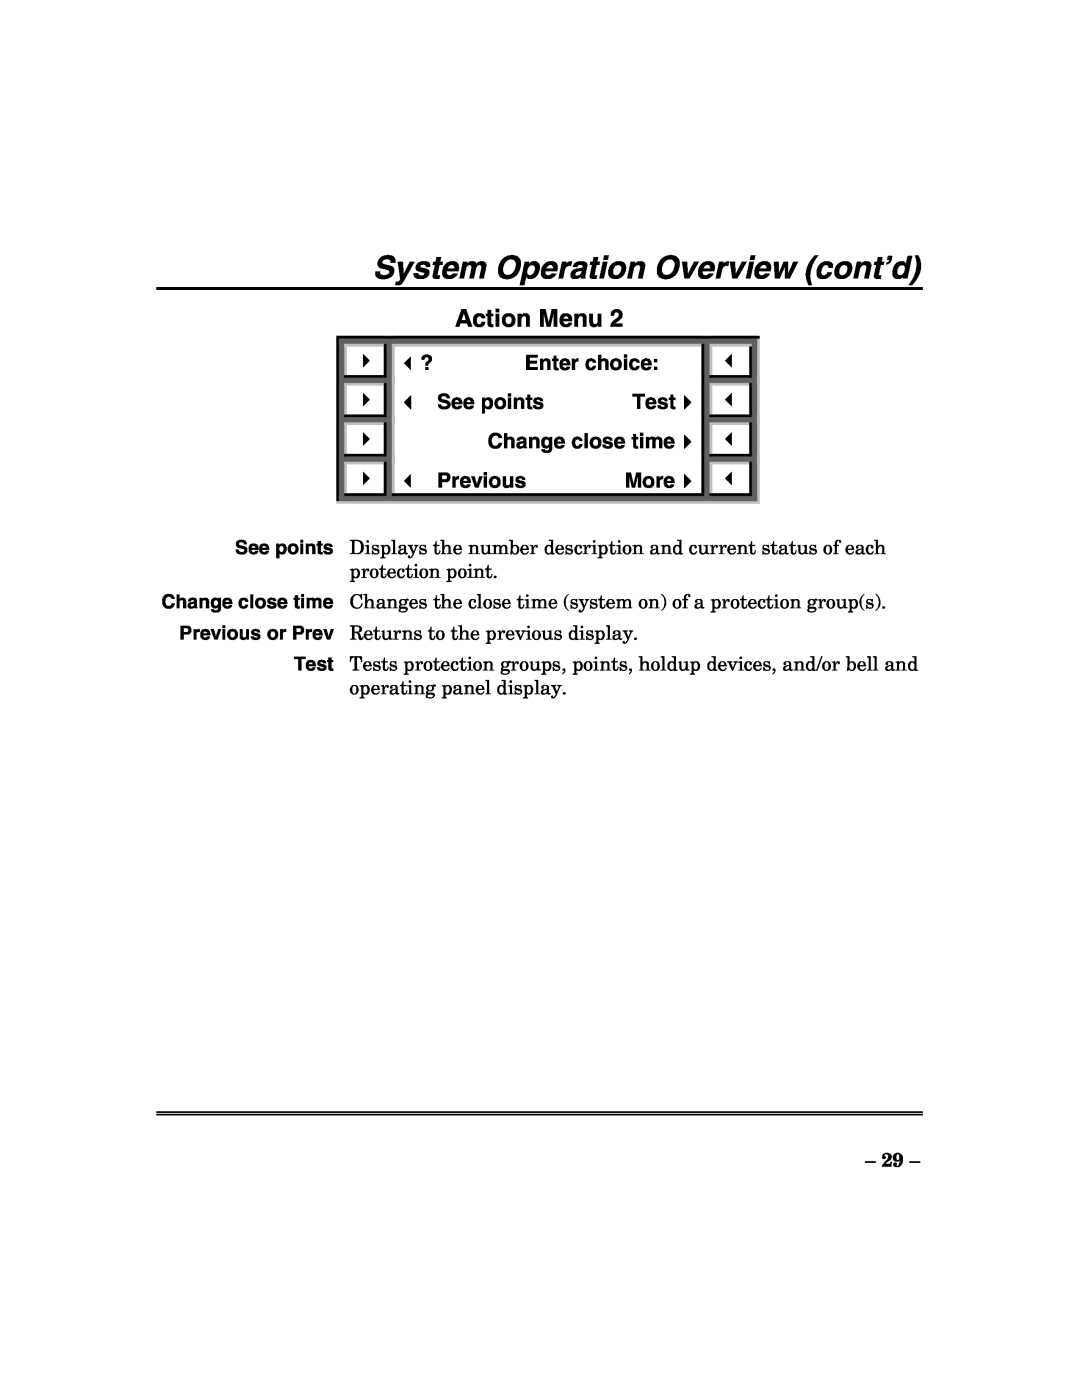 ADT Security Services 200 Plus System Operation Overview cont’d, Action Menu, Enter choice, See points, Test, Previous 